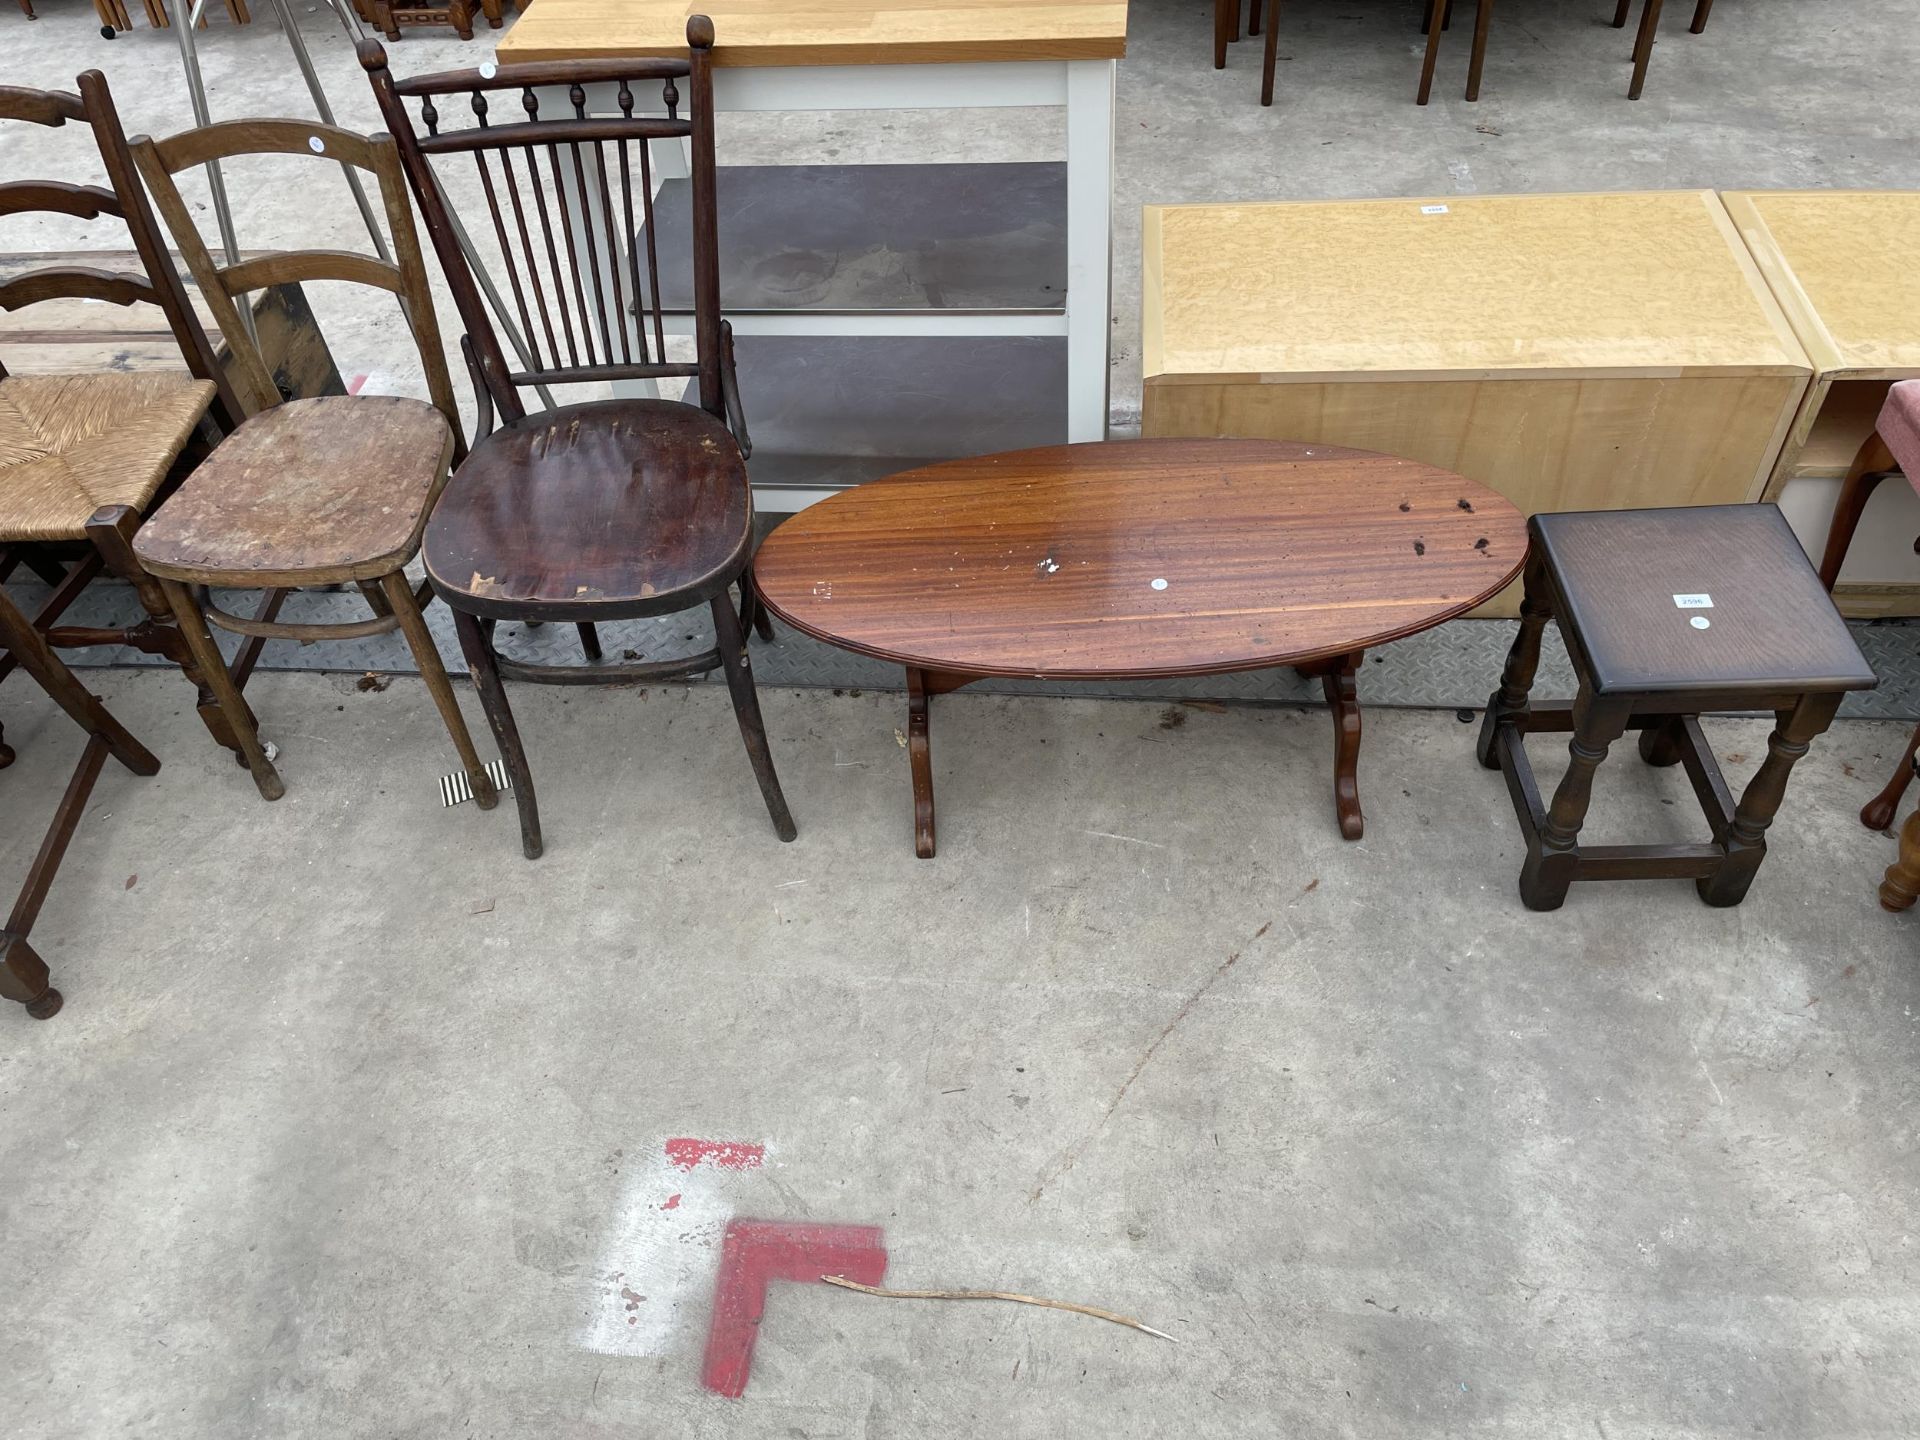 A SMALL OAK TABLE, OVAL COFFEE TABLE, BENTWOOD CHAIR AND ONE OTHER